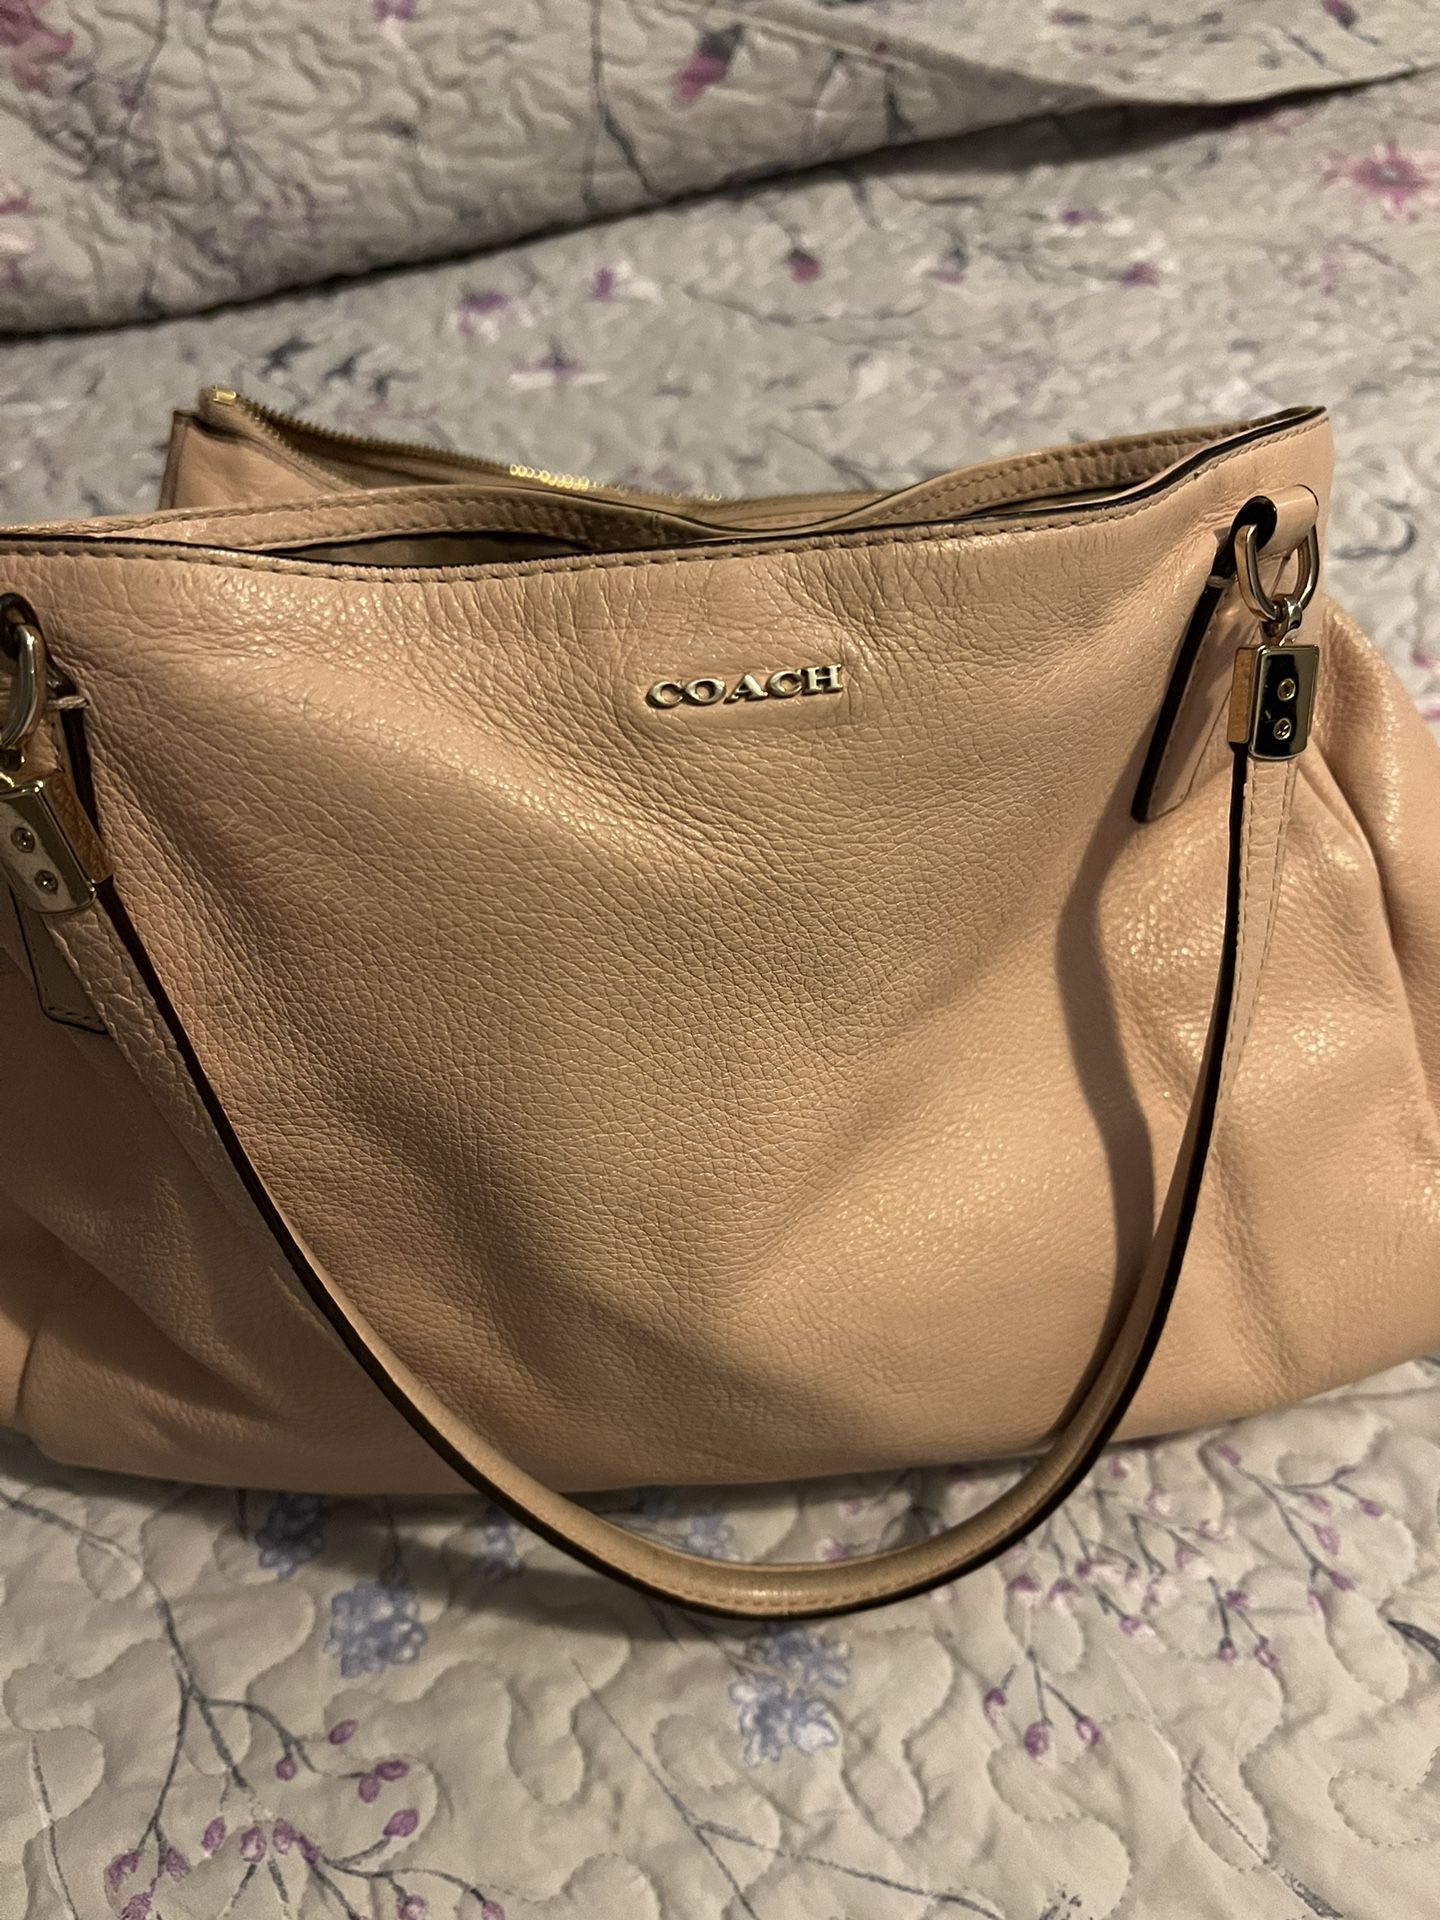 Coach Madison 27859 Leather Coach in Excellent Condition 